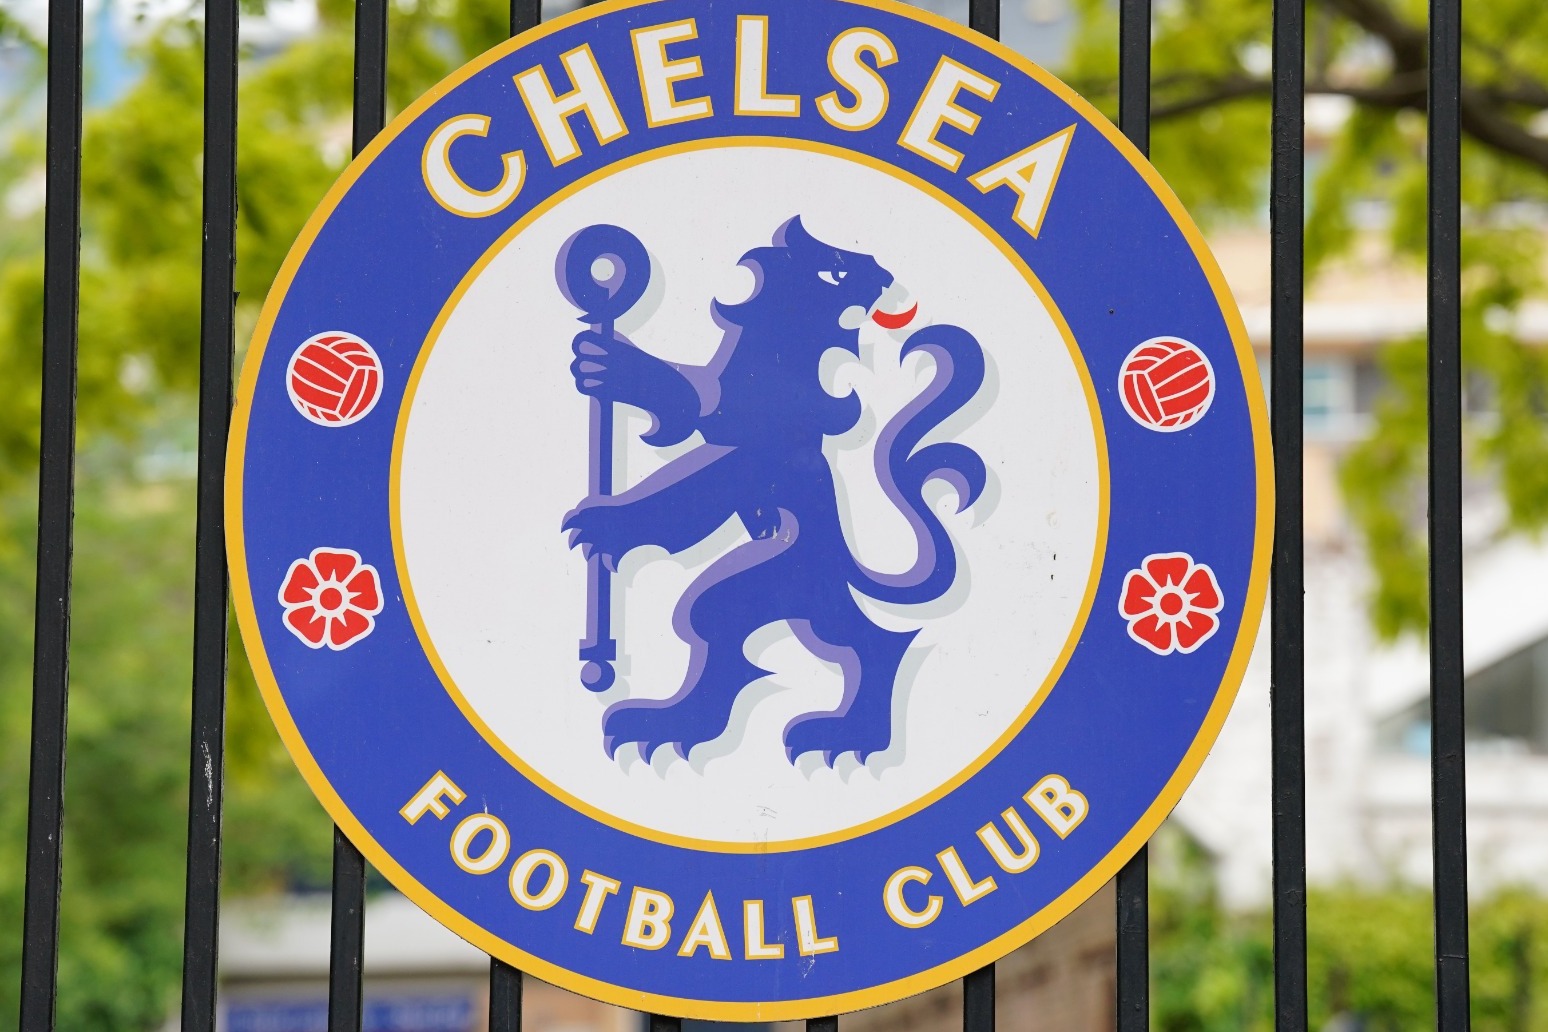 Chelsea confirm agreement to sell the club to Todd Boehly 